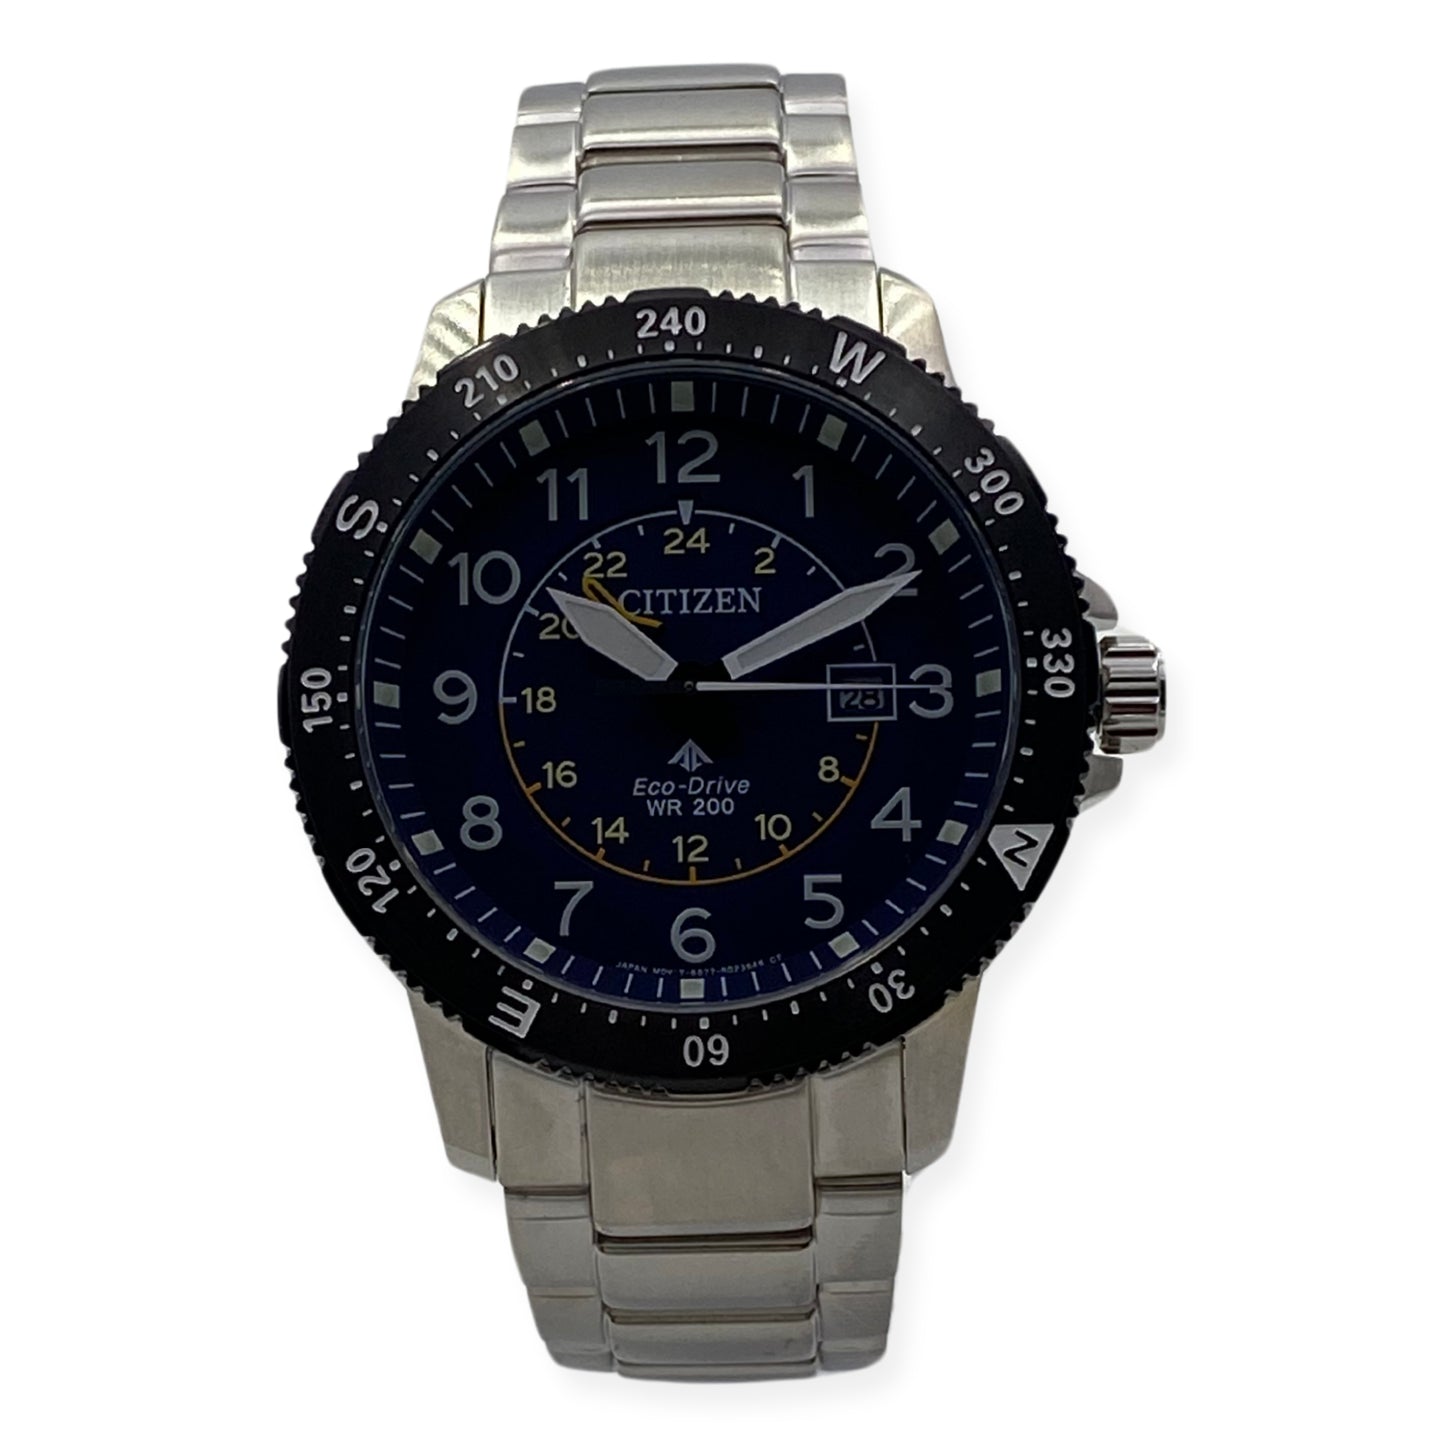 Citizen Promaster Land Eco-drive Blue Dial Stainless Steel Men's Watch